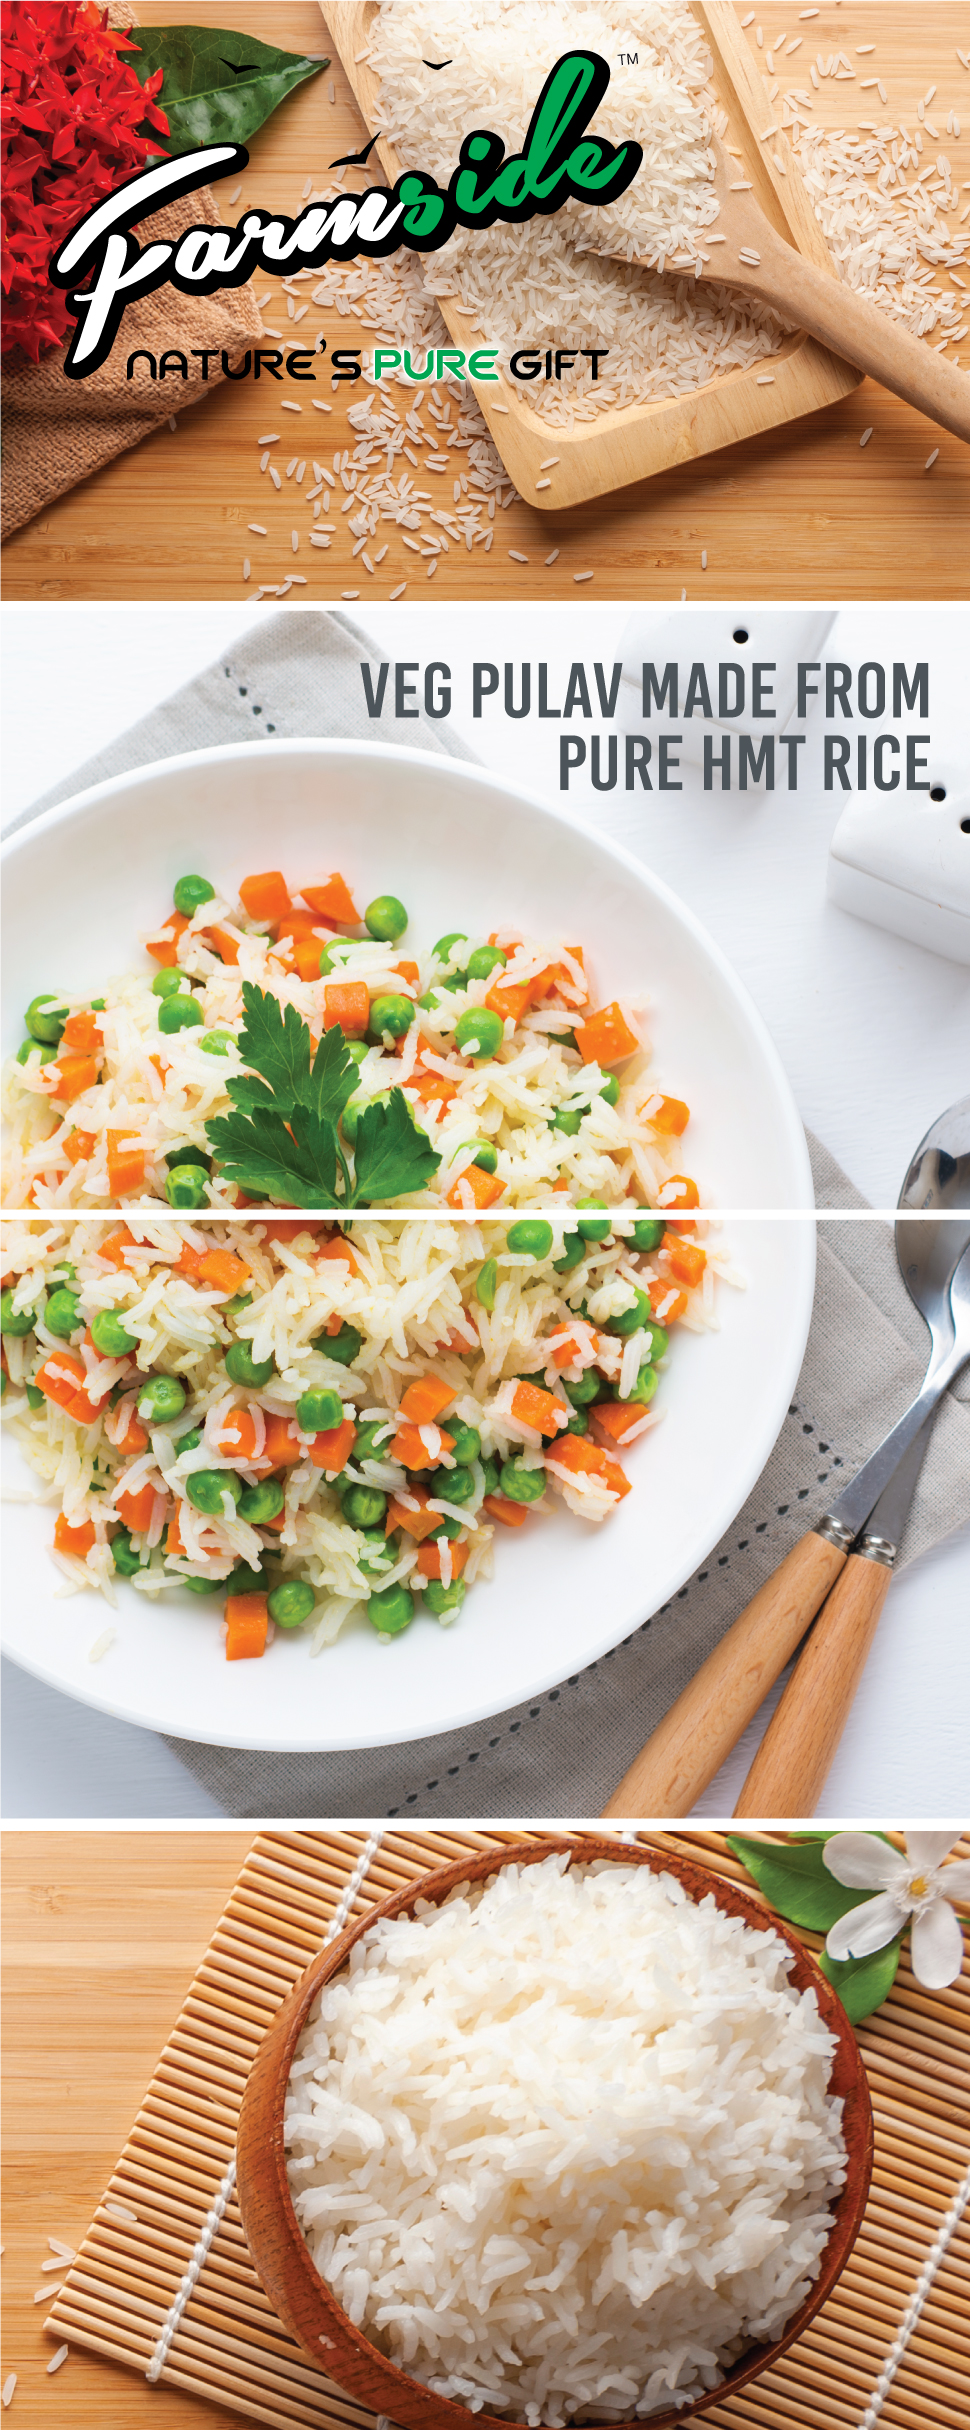 Image of A-Plus Content for Farmside HMT daily rice with images of Veg Pulao and normal rice in a bowl.